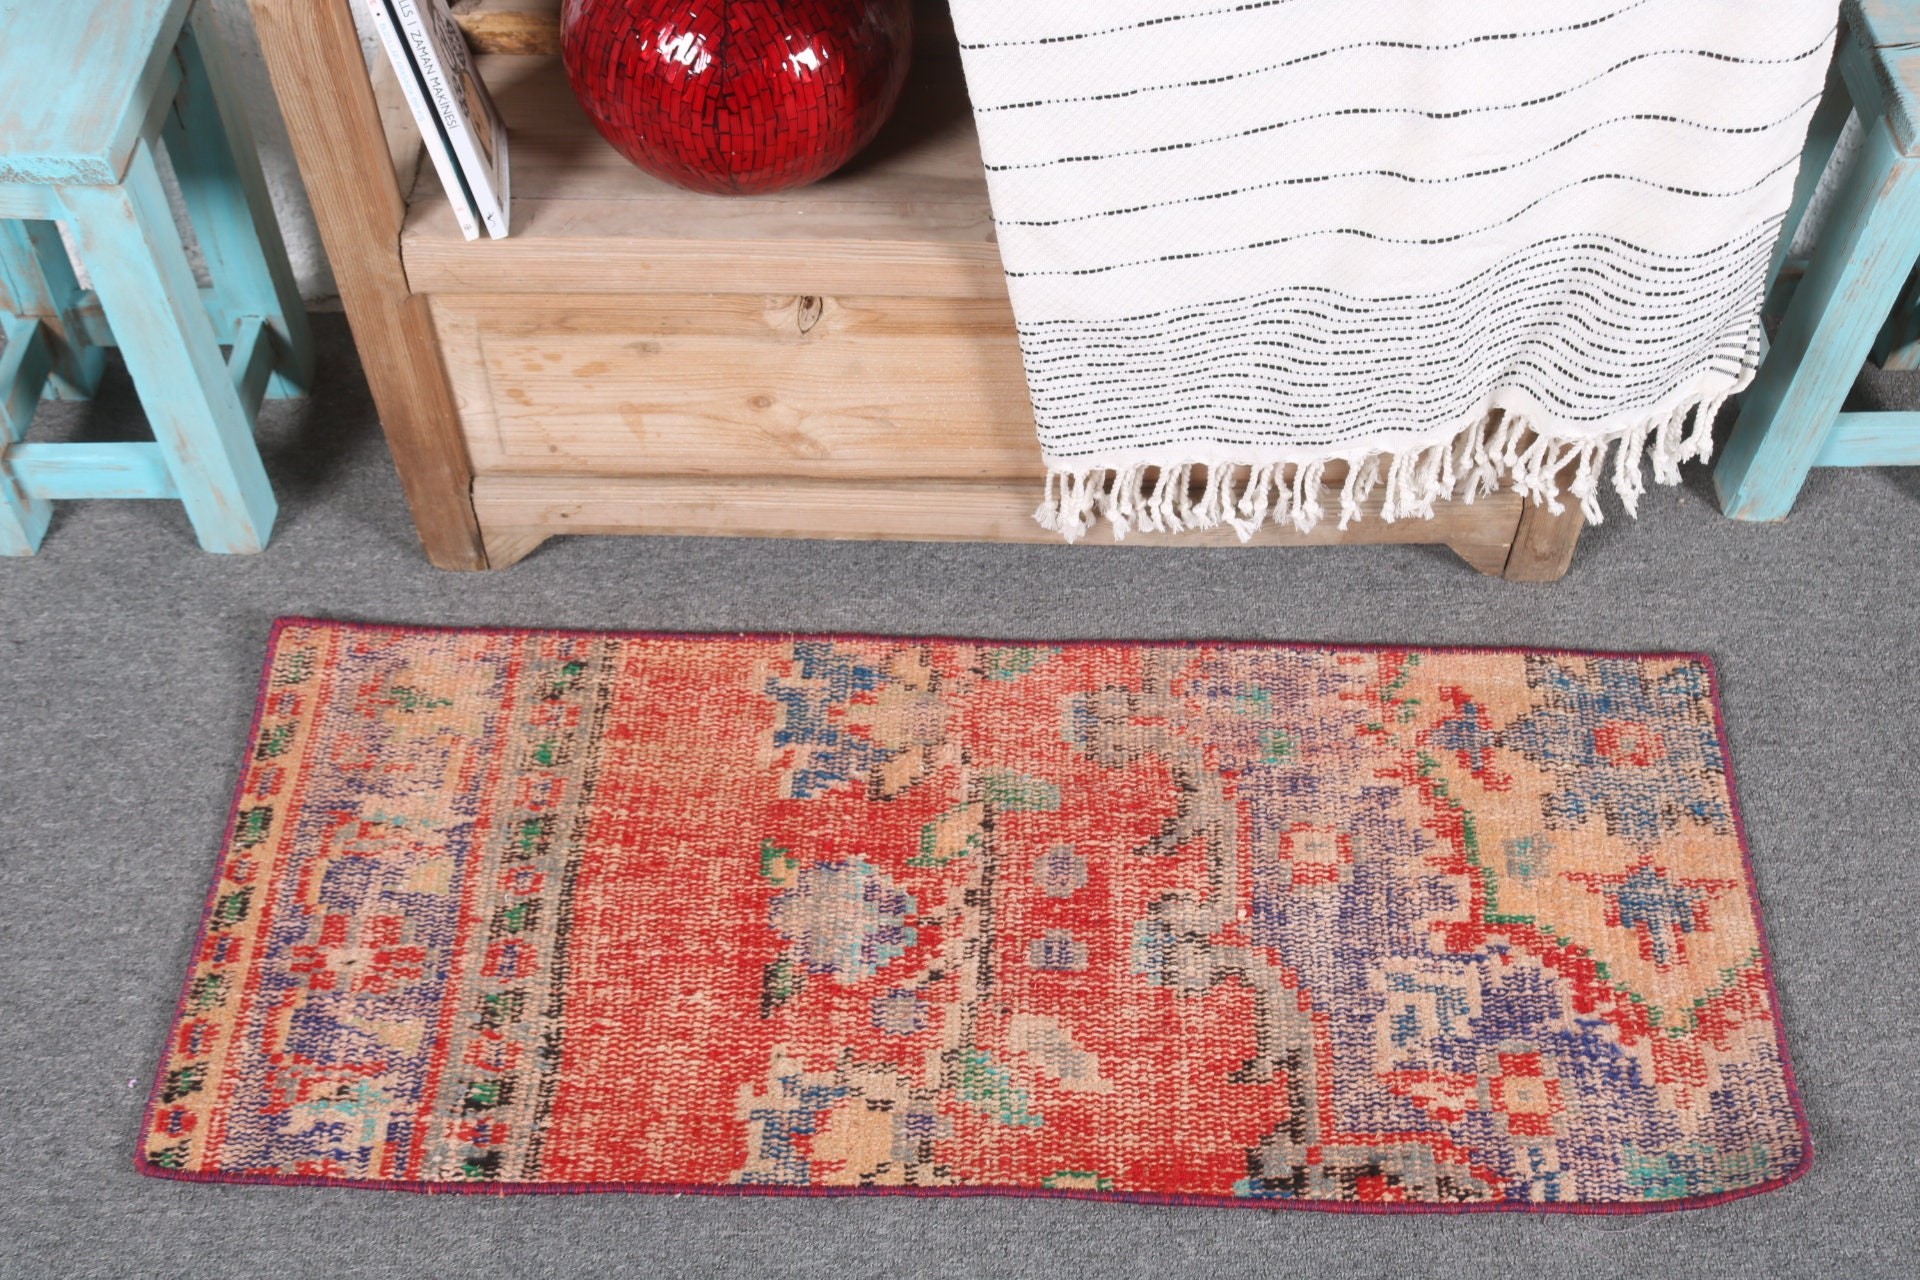 Bathroom Rugs, Vintage Rugs, Oushak Rugs, Kitchen Rugs, 1.3x3.2 ft Small Rugs, Turkish Rug, Wall Hanging Rug, Red Anatolian Rugs, Dorm Rug